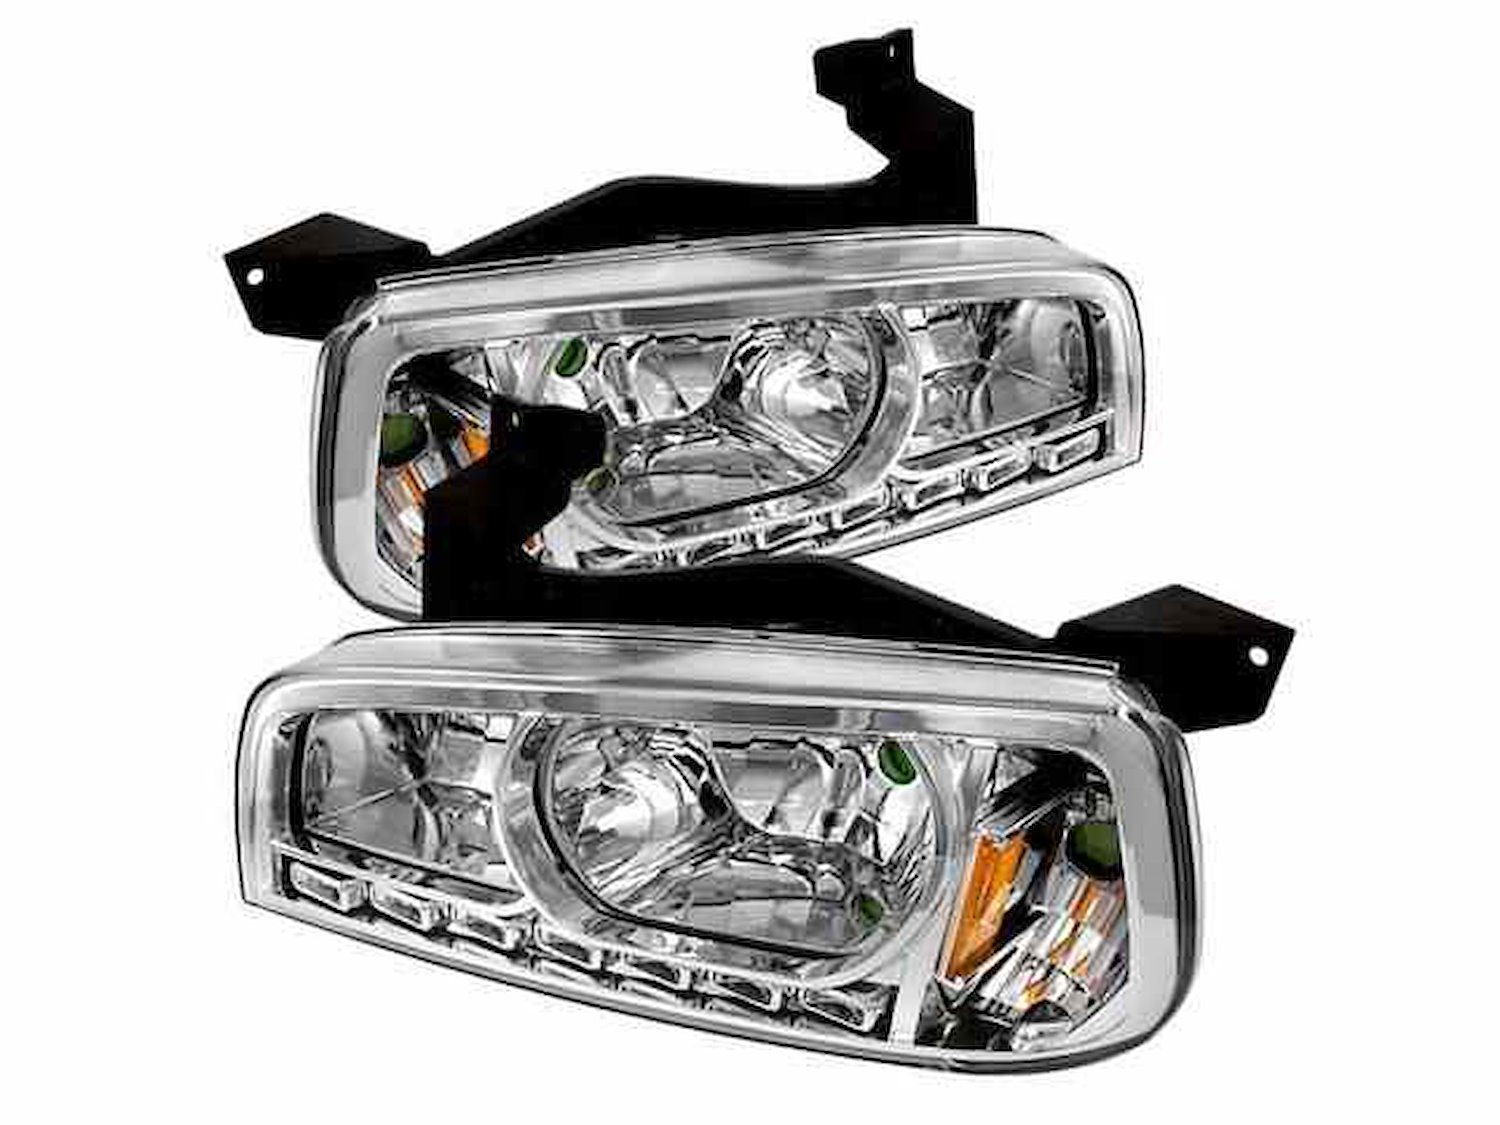 xTune LED Crystal Headlights 2006-2010 Dodge Charger